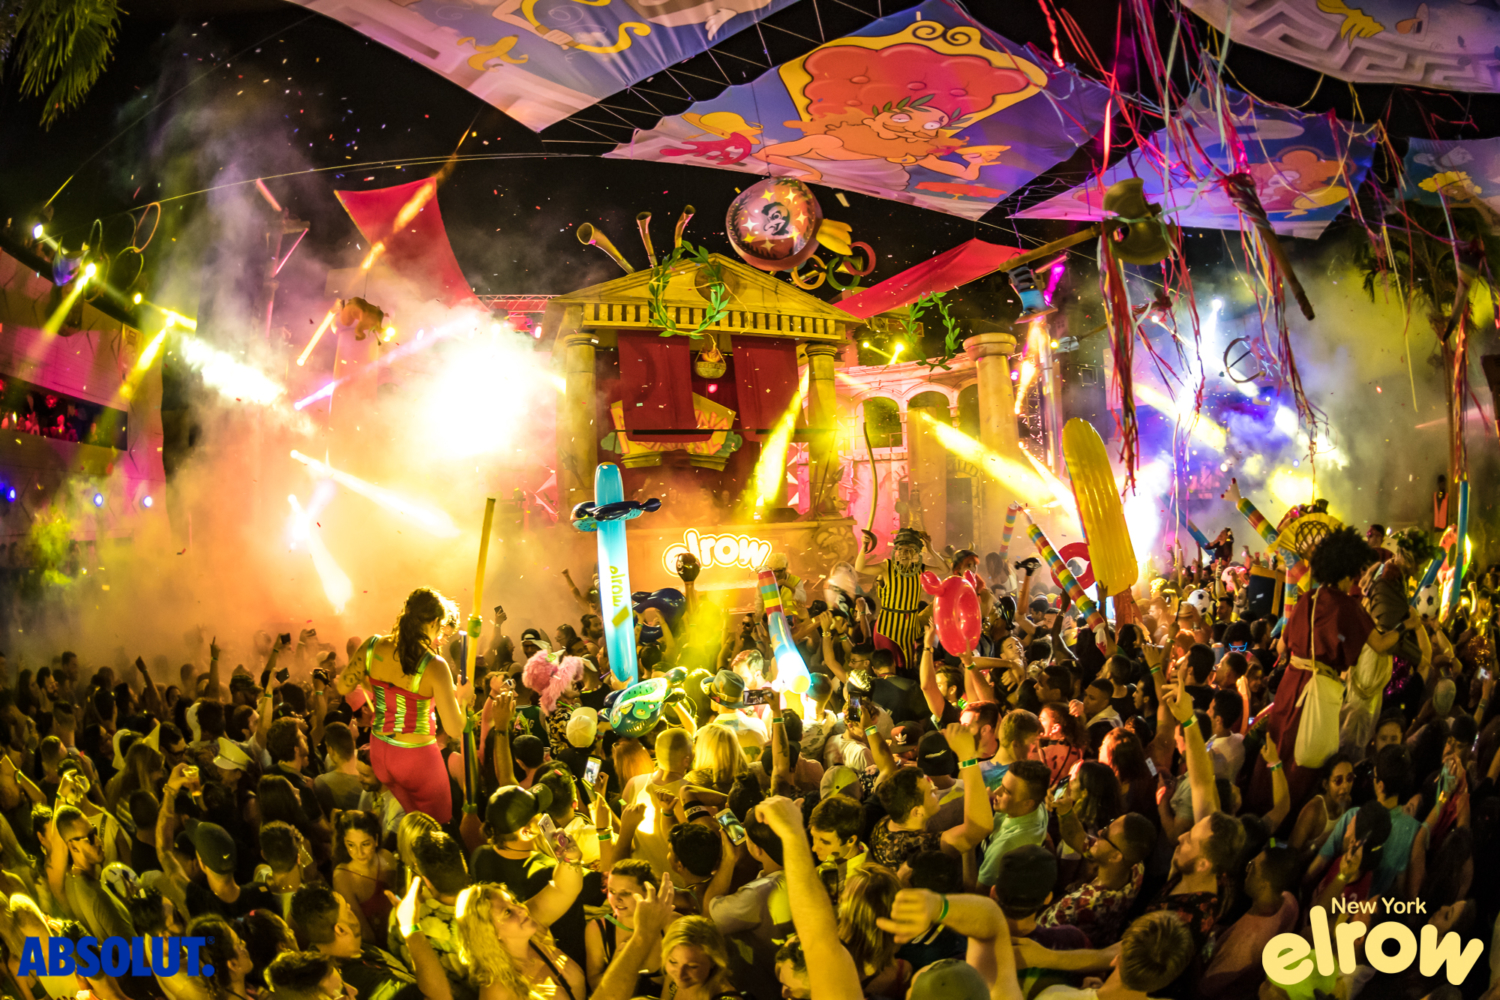 Making magic happen at Elrow Open Air – photos by aLIVE coverageELROW2018 0729 000642 9911 ALIVECOVERAGE